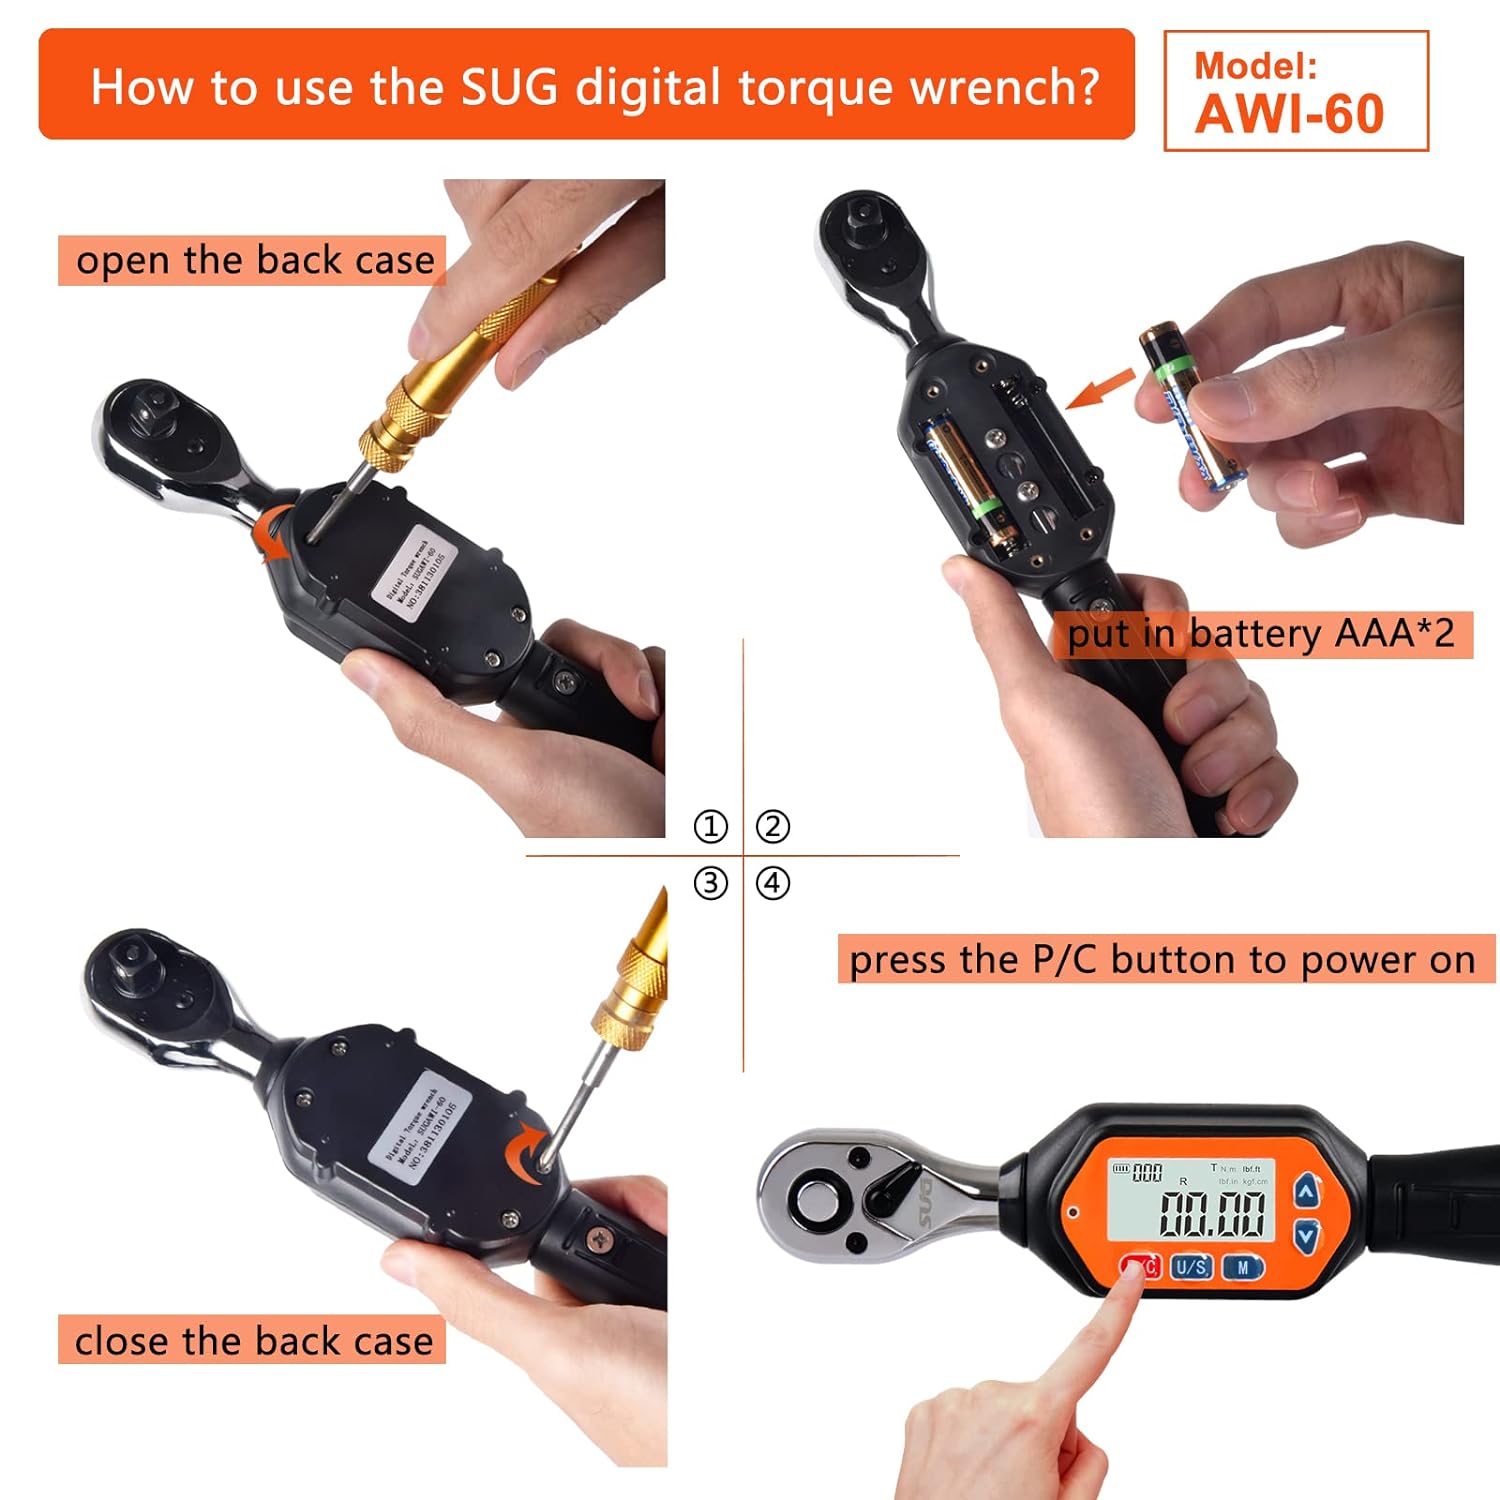 SUG Mini Digital Torque Wrench, 3/8-inch Drive with Buzzer & LED, 1.33 to 44.25 ft-lbs, Professional Electronic Short Handle Torque Wrenches Bike Car Repairing Tool (Accurate to 2%) Calibrated